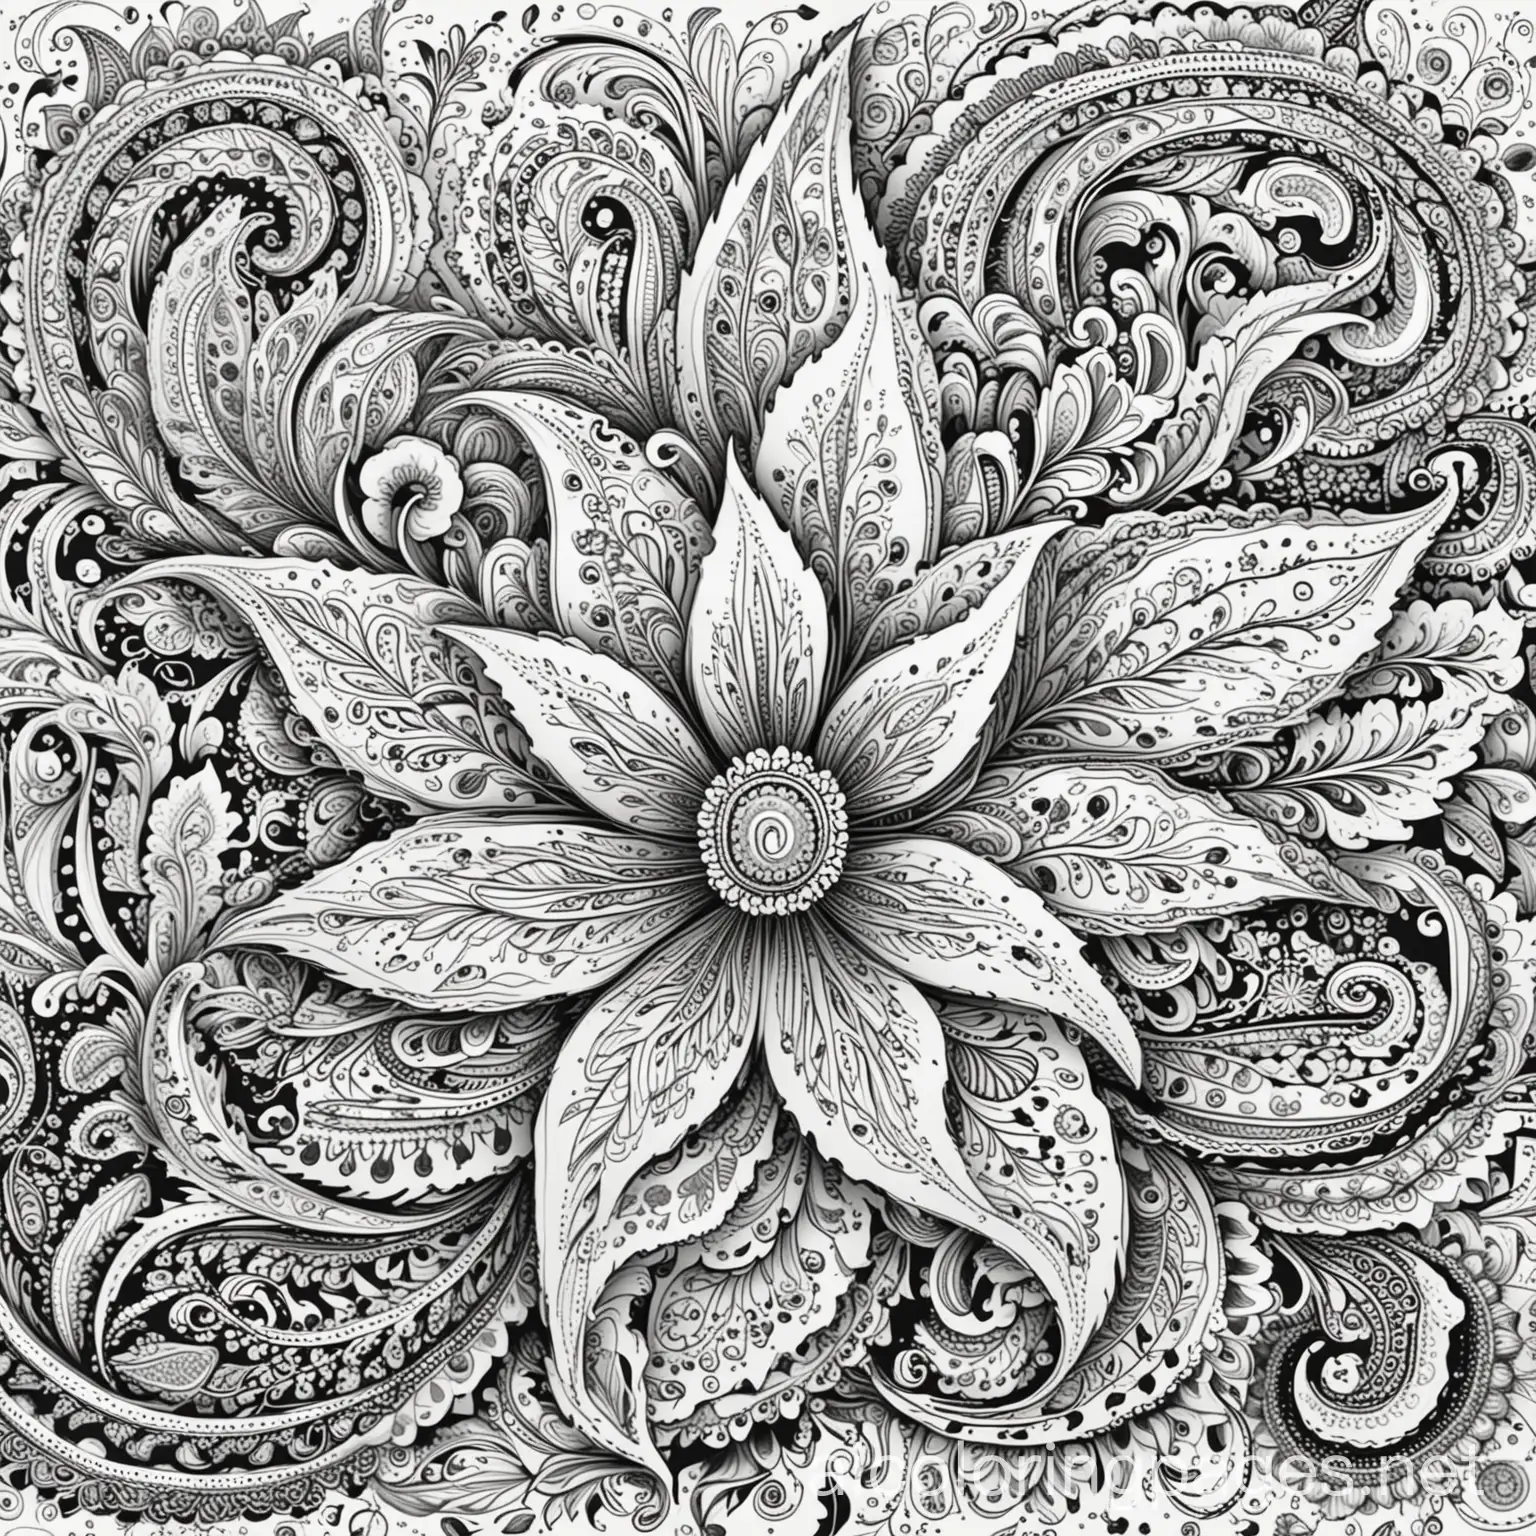 Beautiful flower with detailed paisley design inside, white background, clear crisp lines, no grayscale, no shadows, no shading, Coloring Page, black and white, line art, white background, Simplicity, Ample White Space.